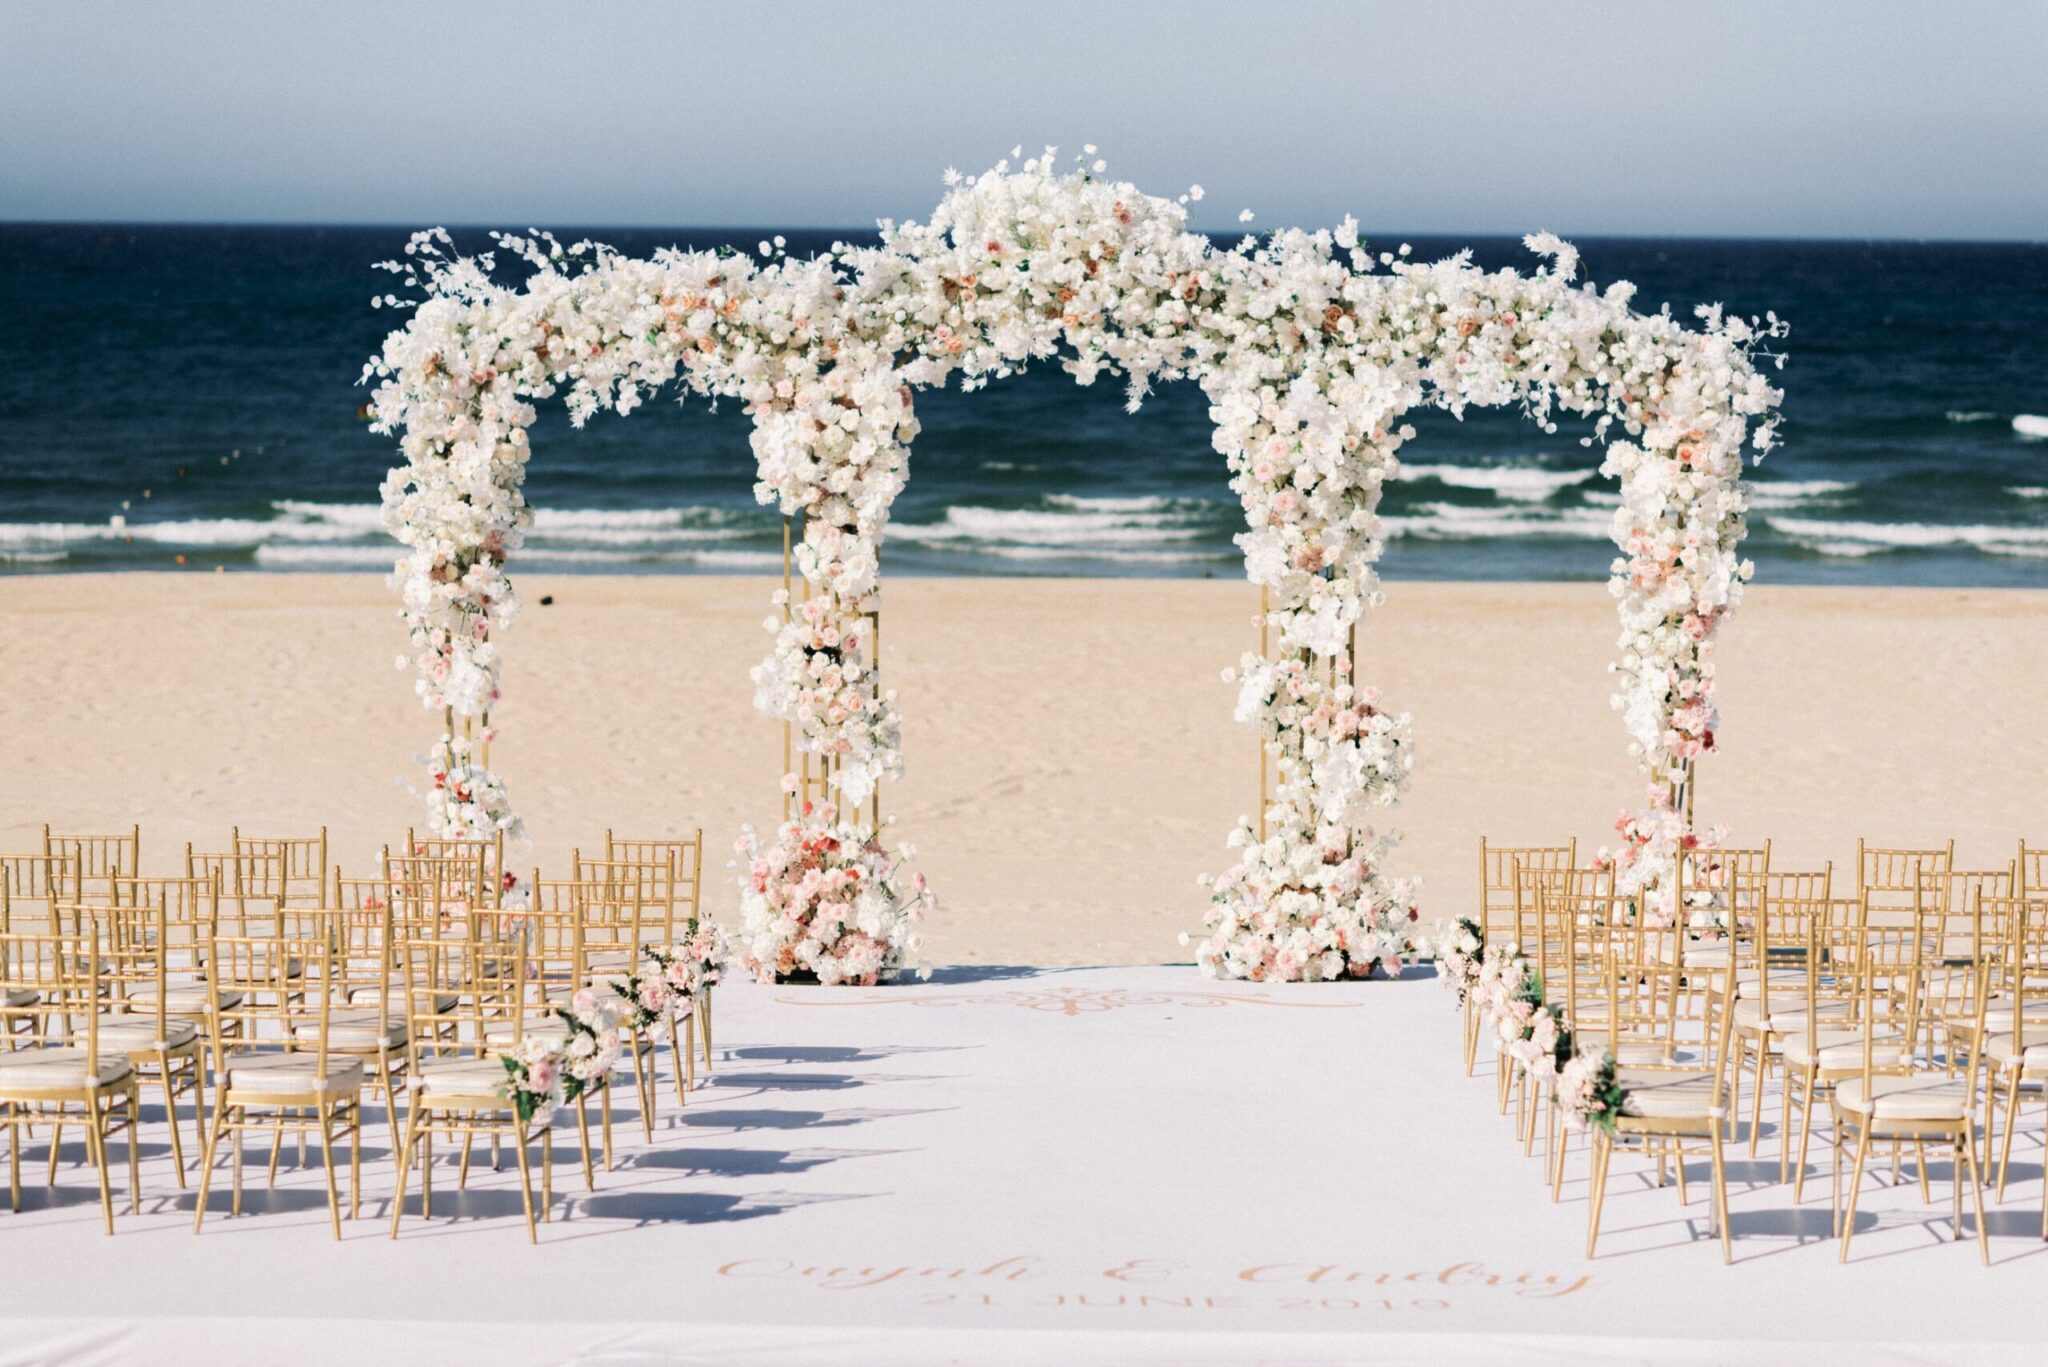 A dreamy beach wedding in Danang for Quynh and Andriy